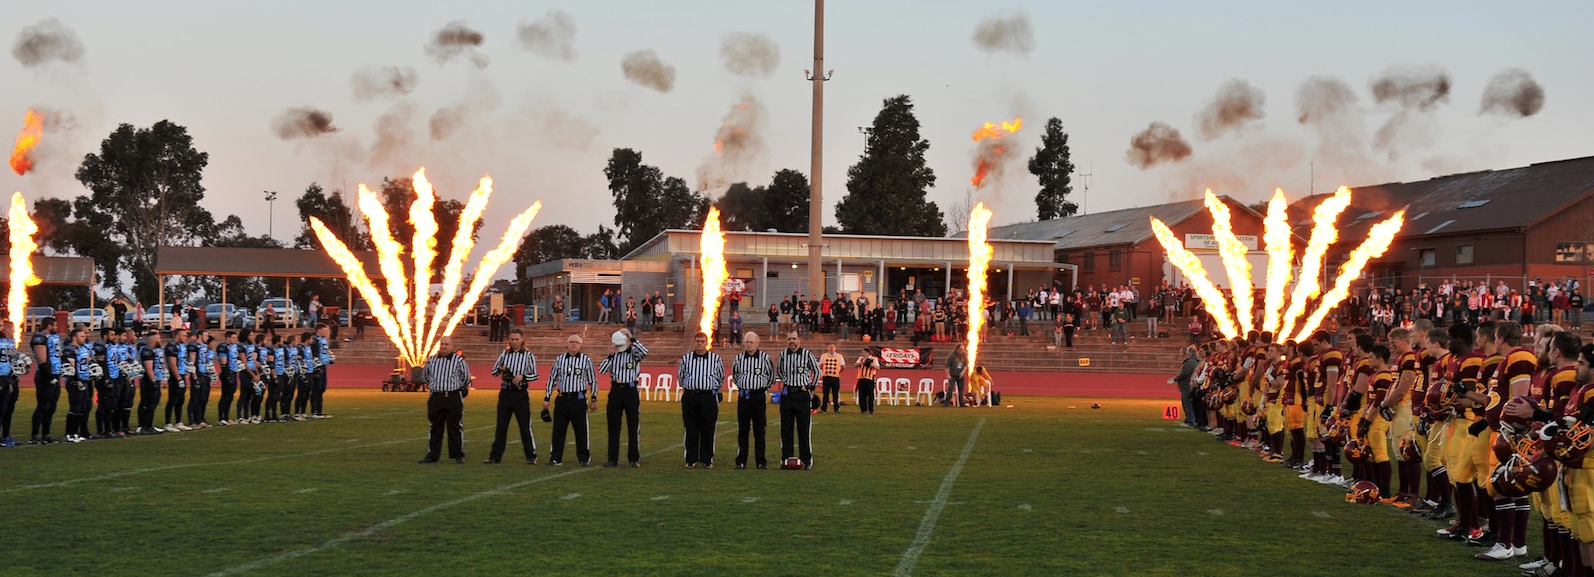 Warriors & Buccaneers line up for the National Anthem (Photo courtesy of barendphotos.com)